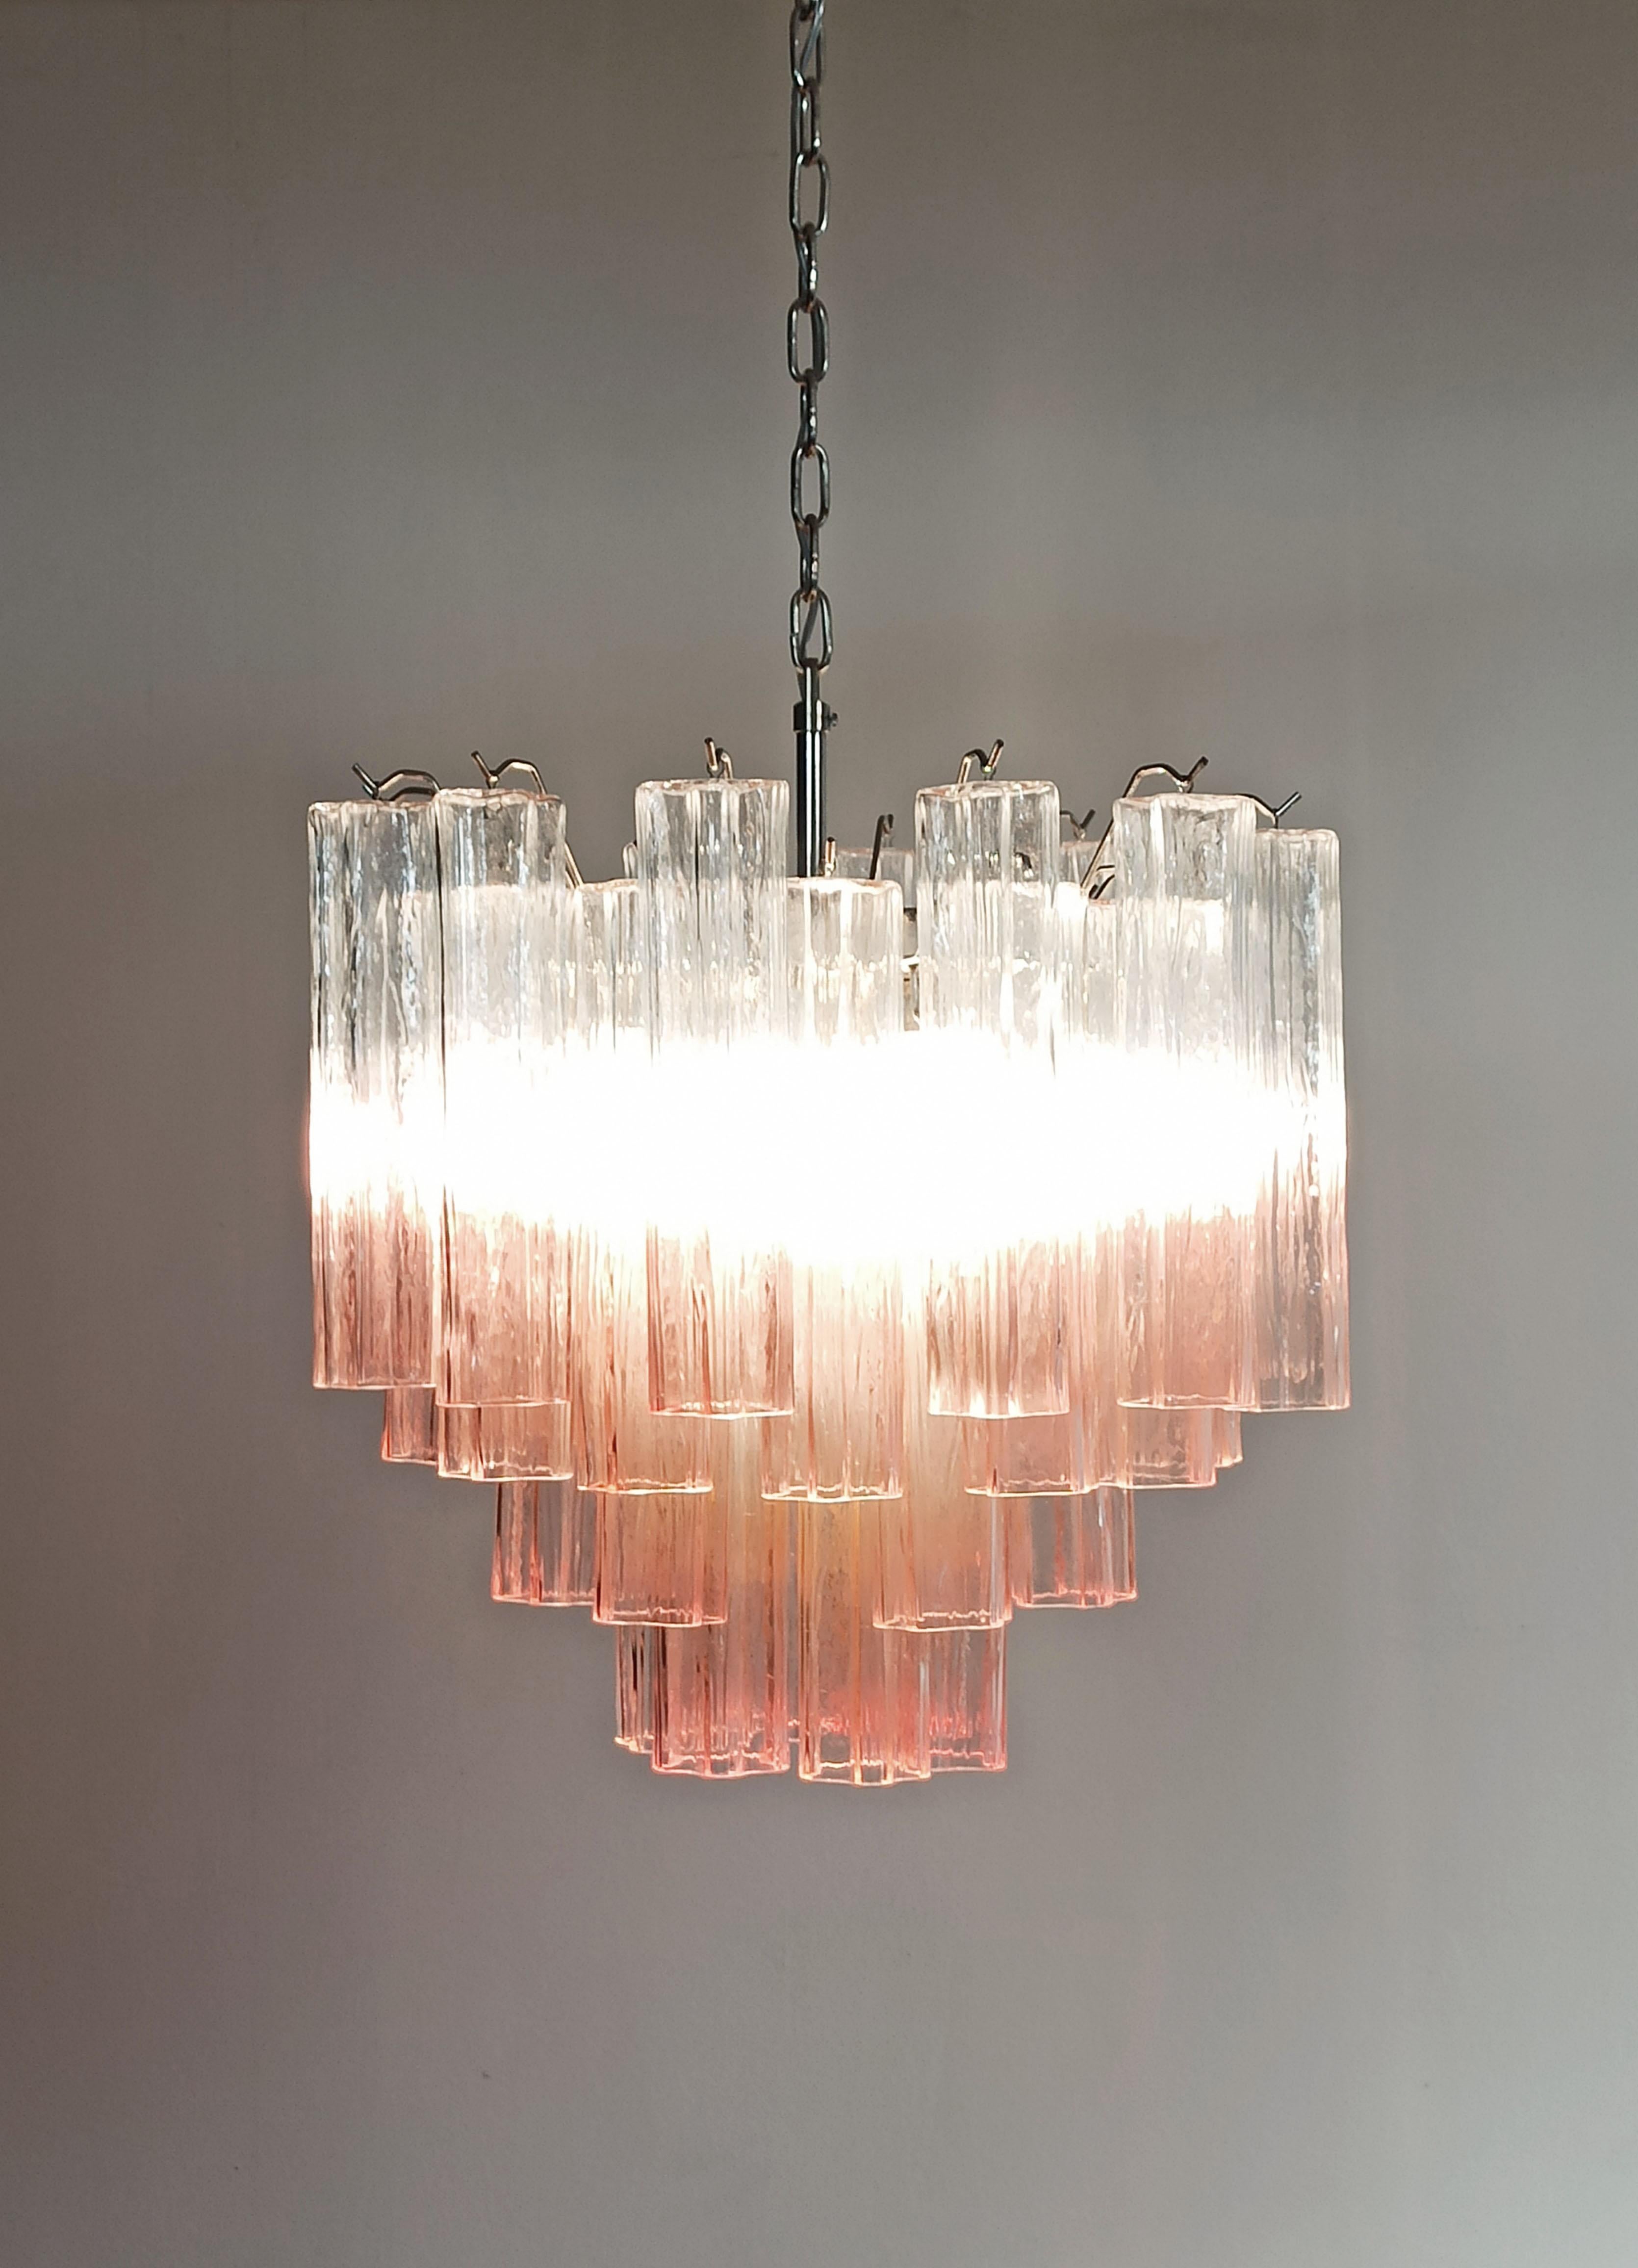 Italian vintage chandelier in Murano glass and nickel-plated metal structure. The armor polished nickel supports 36 large shaded pink glass tubes in a star shape.
Period: late 20th century
Dimensions:  49 inches (125 cm) height with chain; 23.30